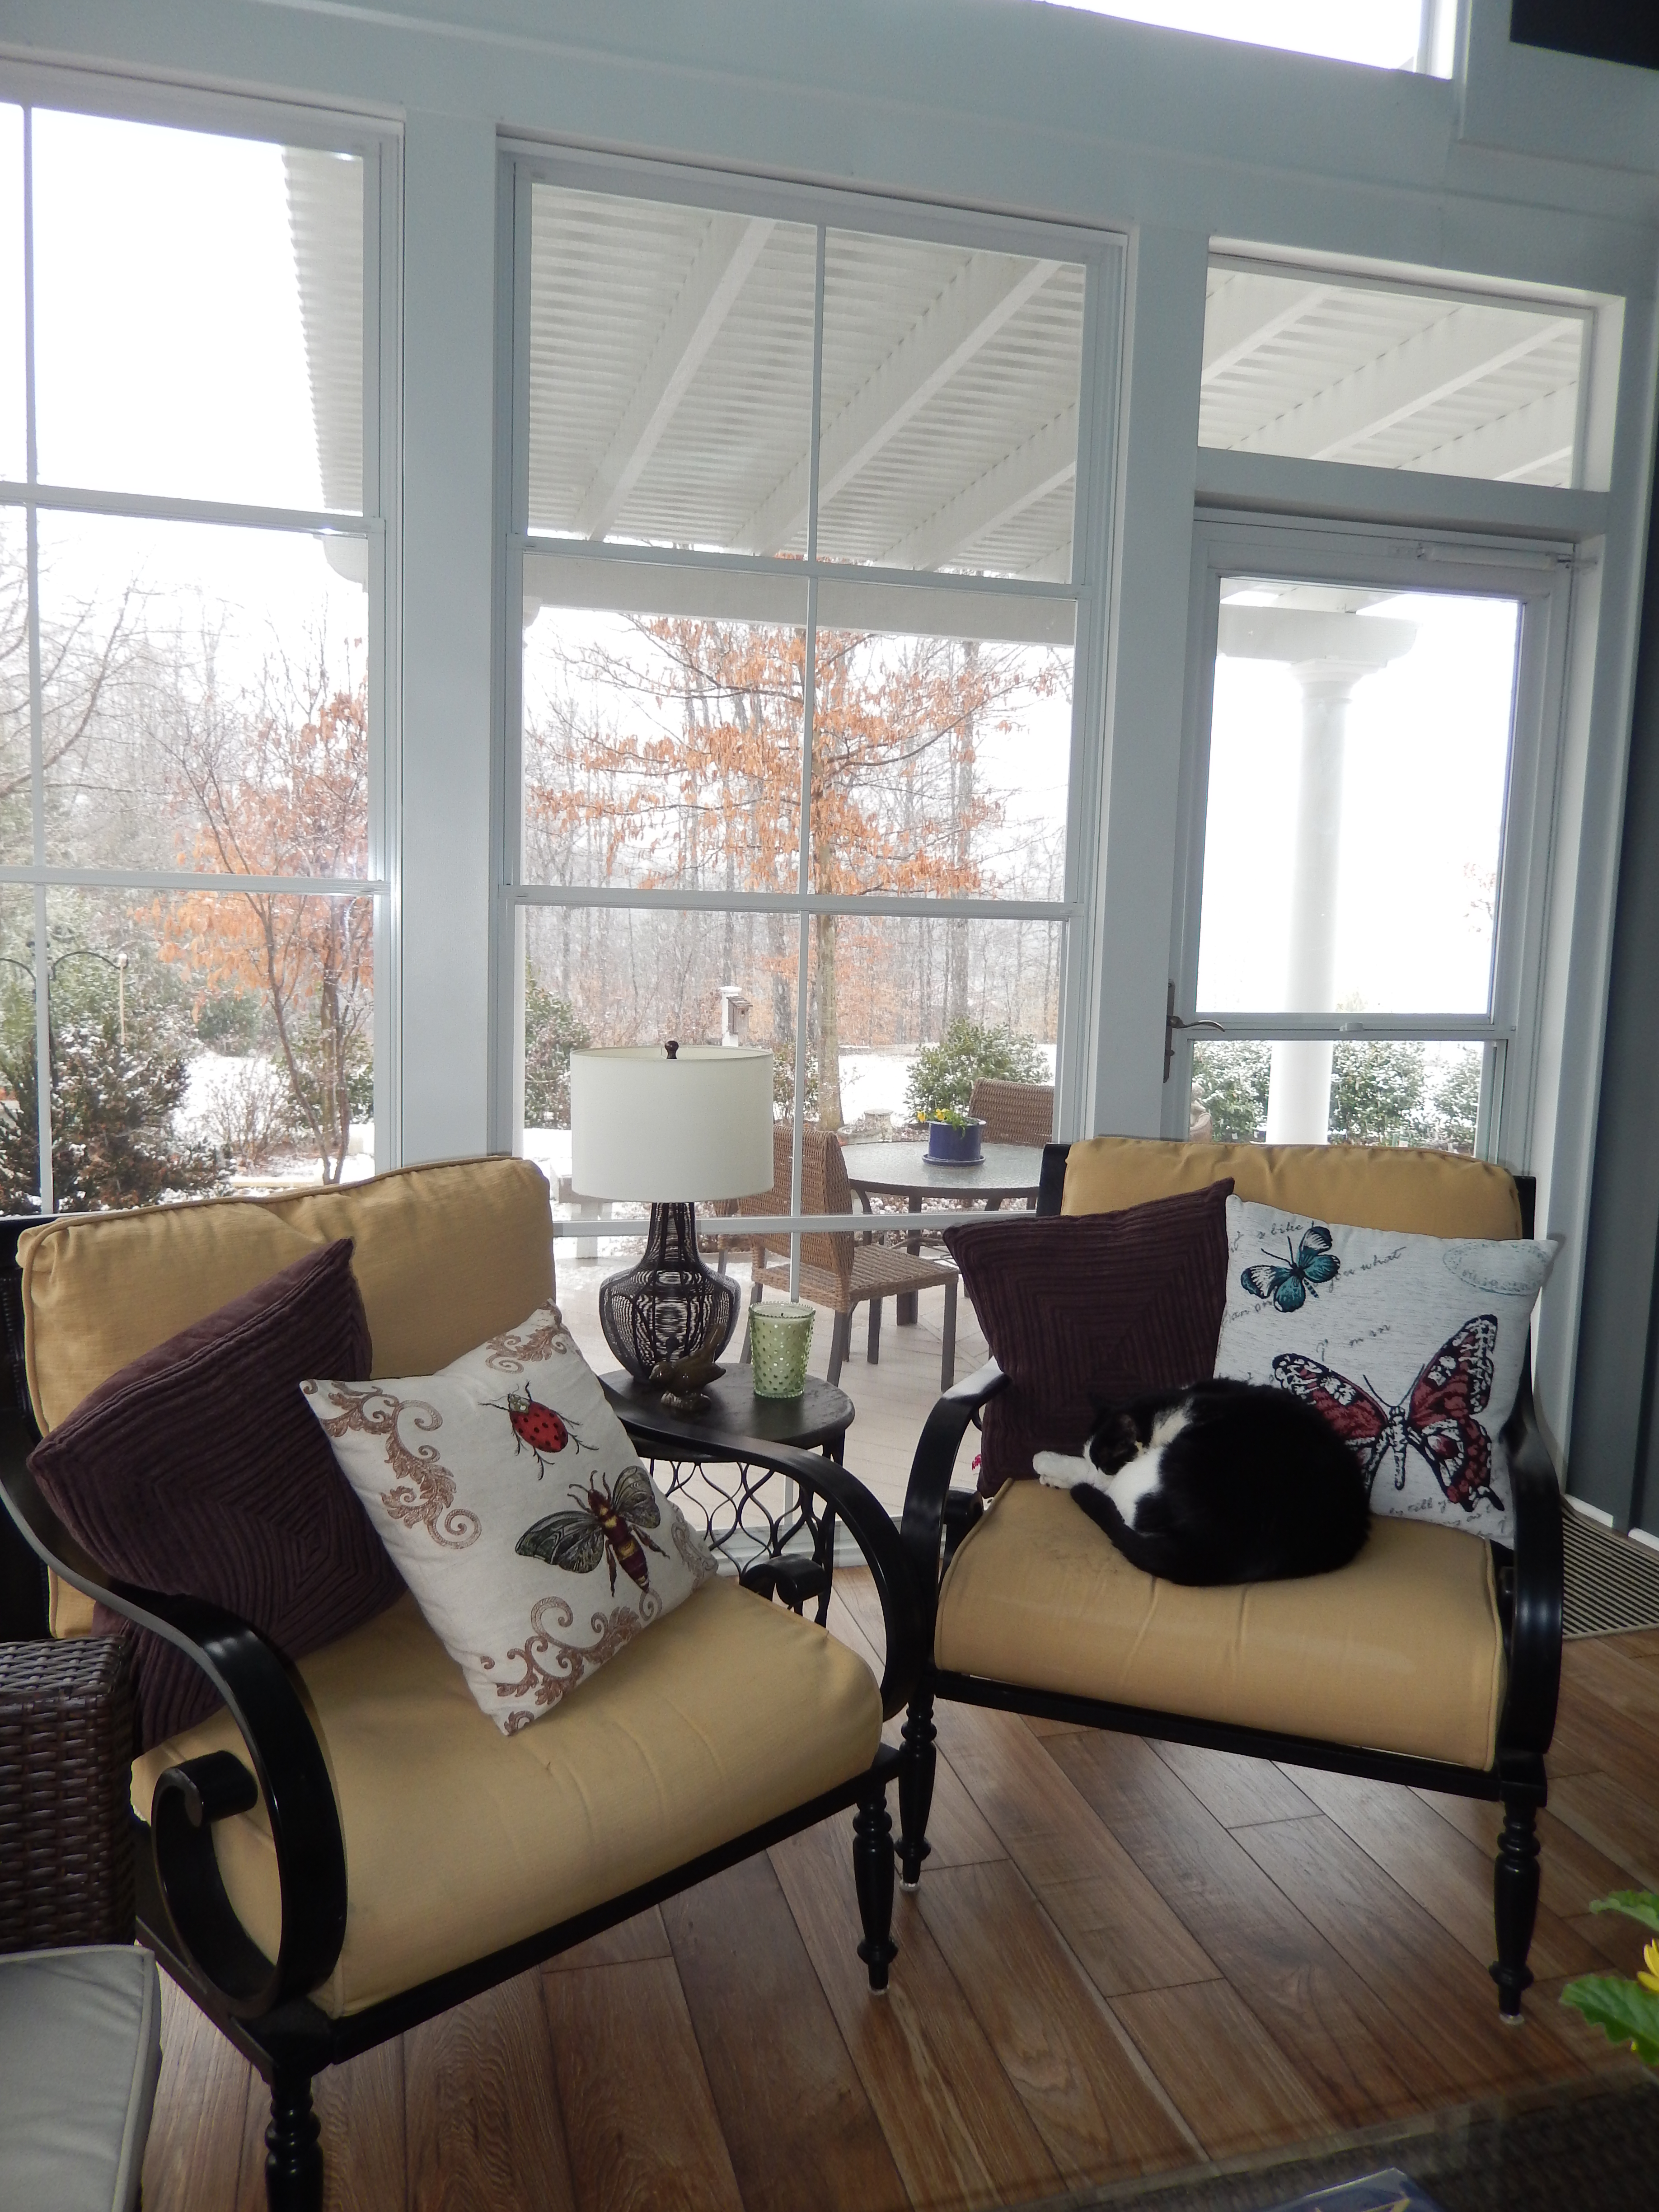 Sunroom with chairs and a side table.